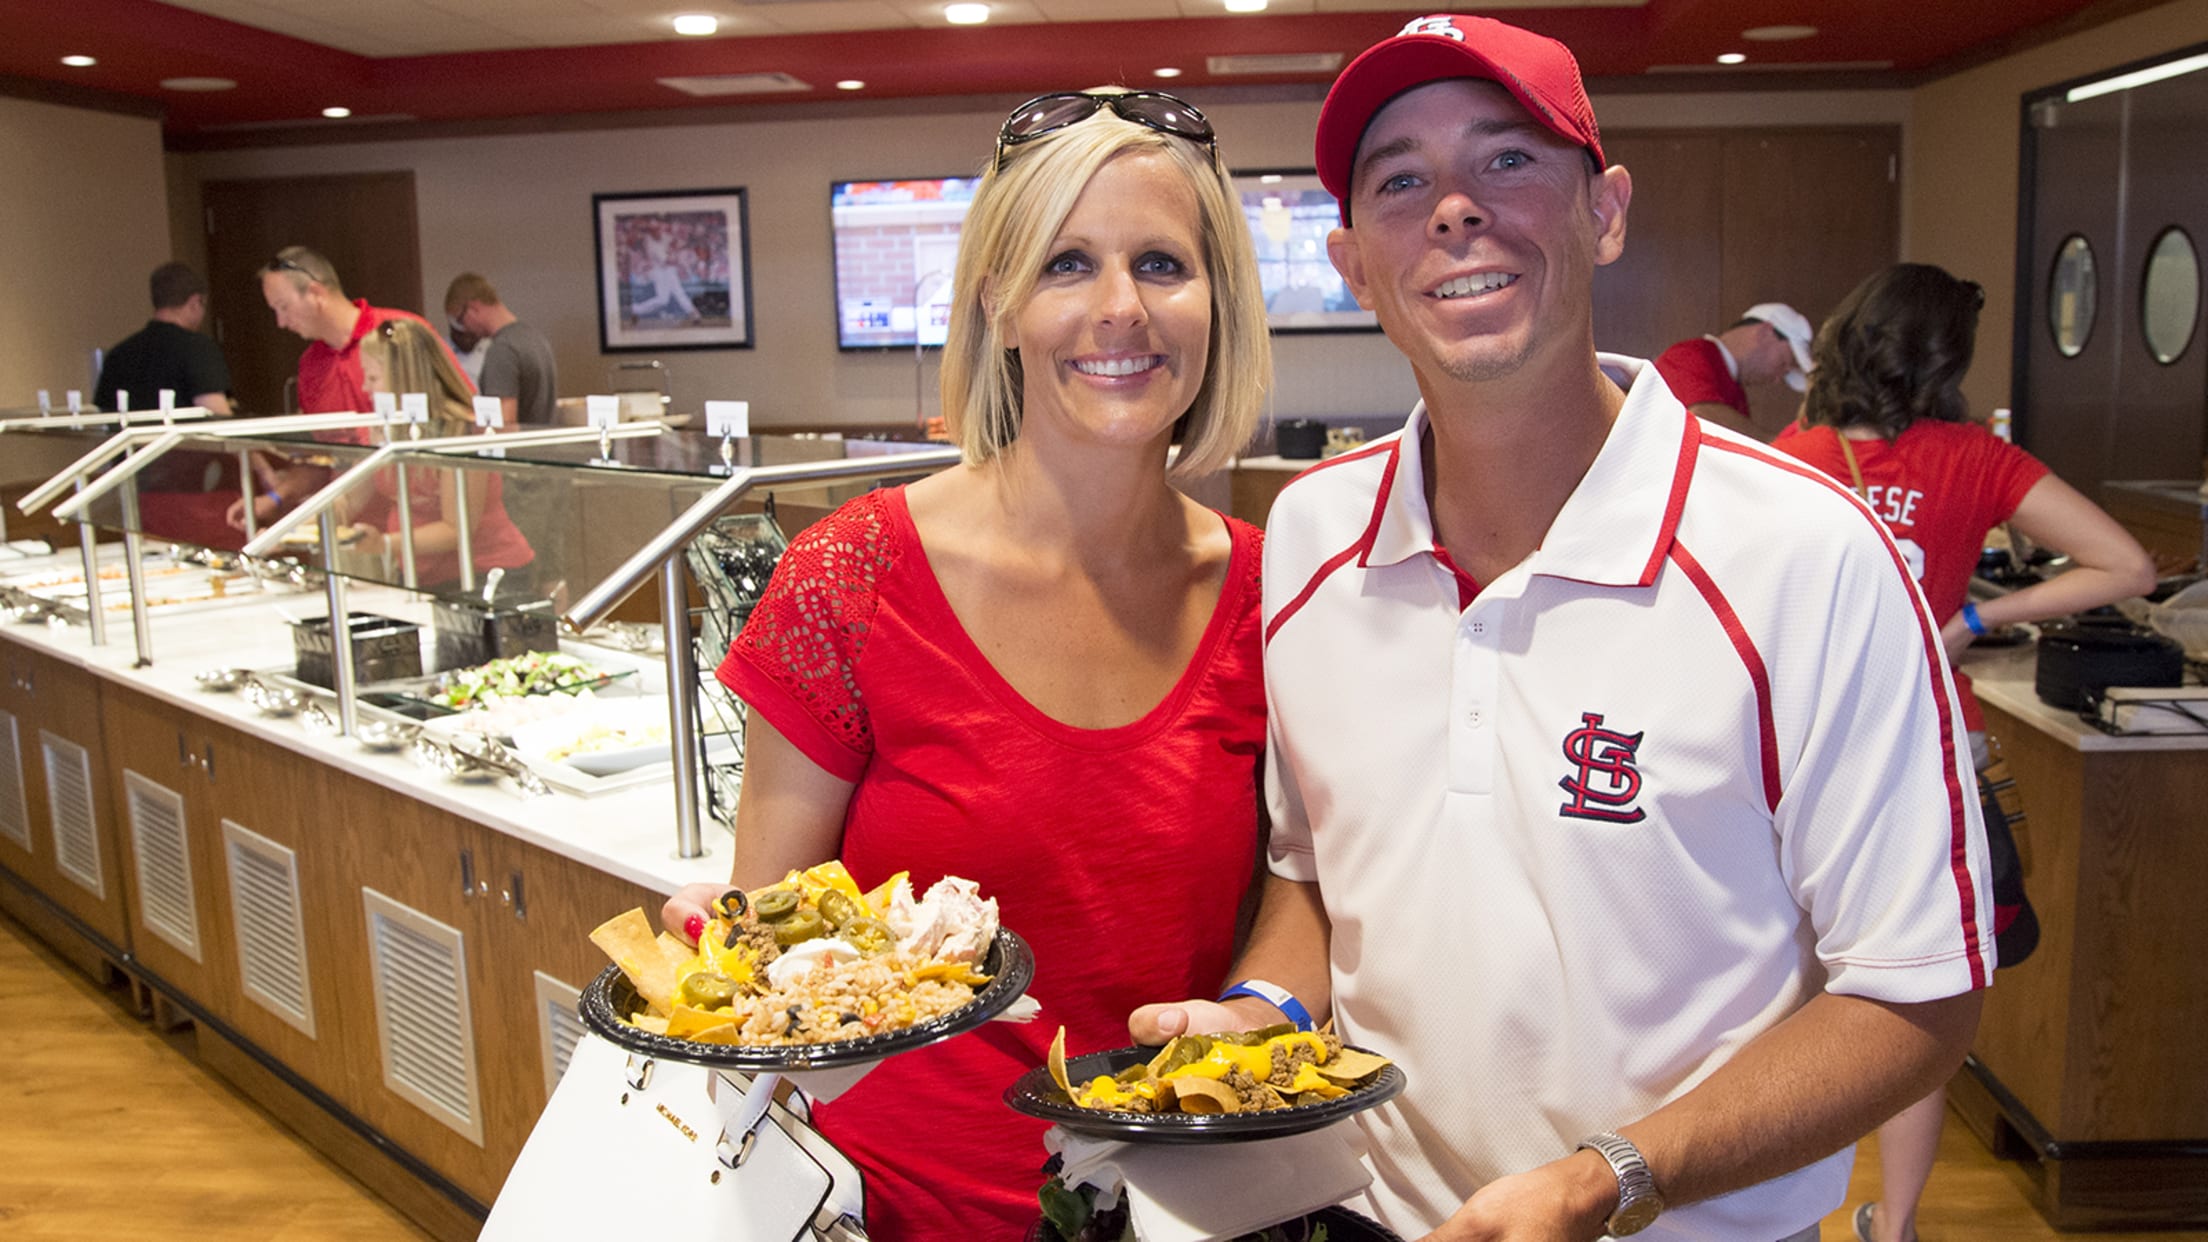 Cardinals Roll Out New Cardinals Nation Food Truck